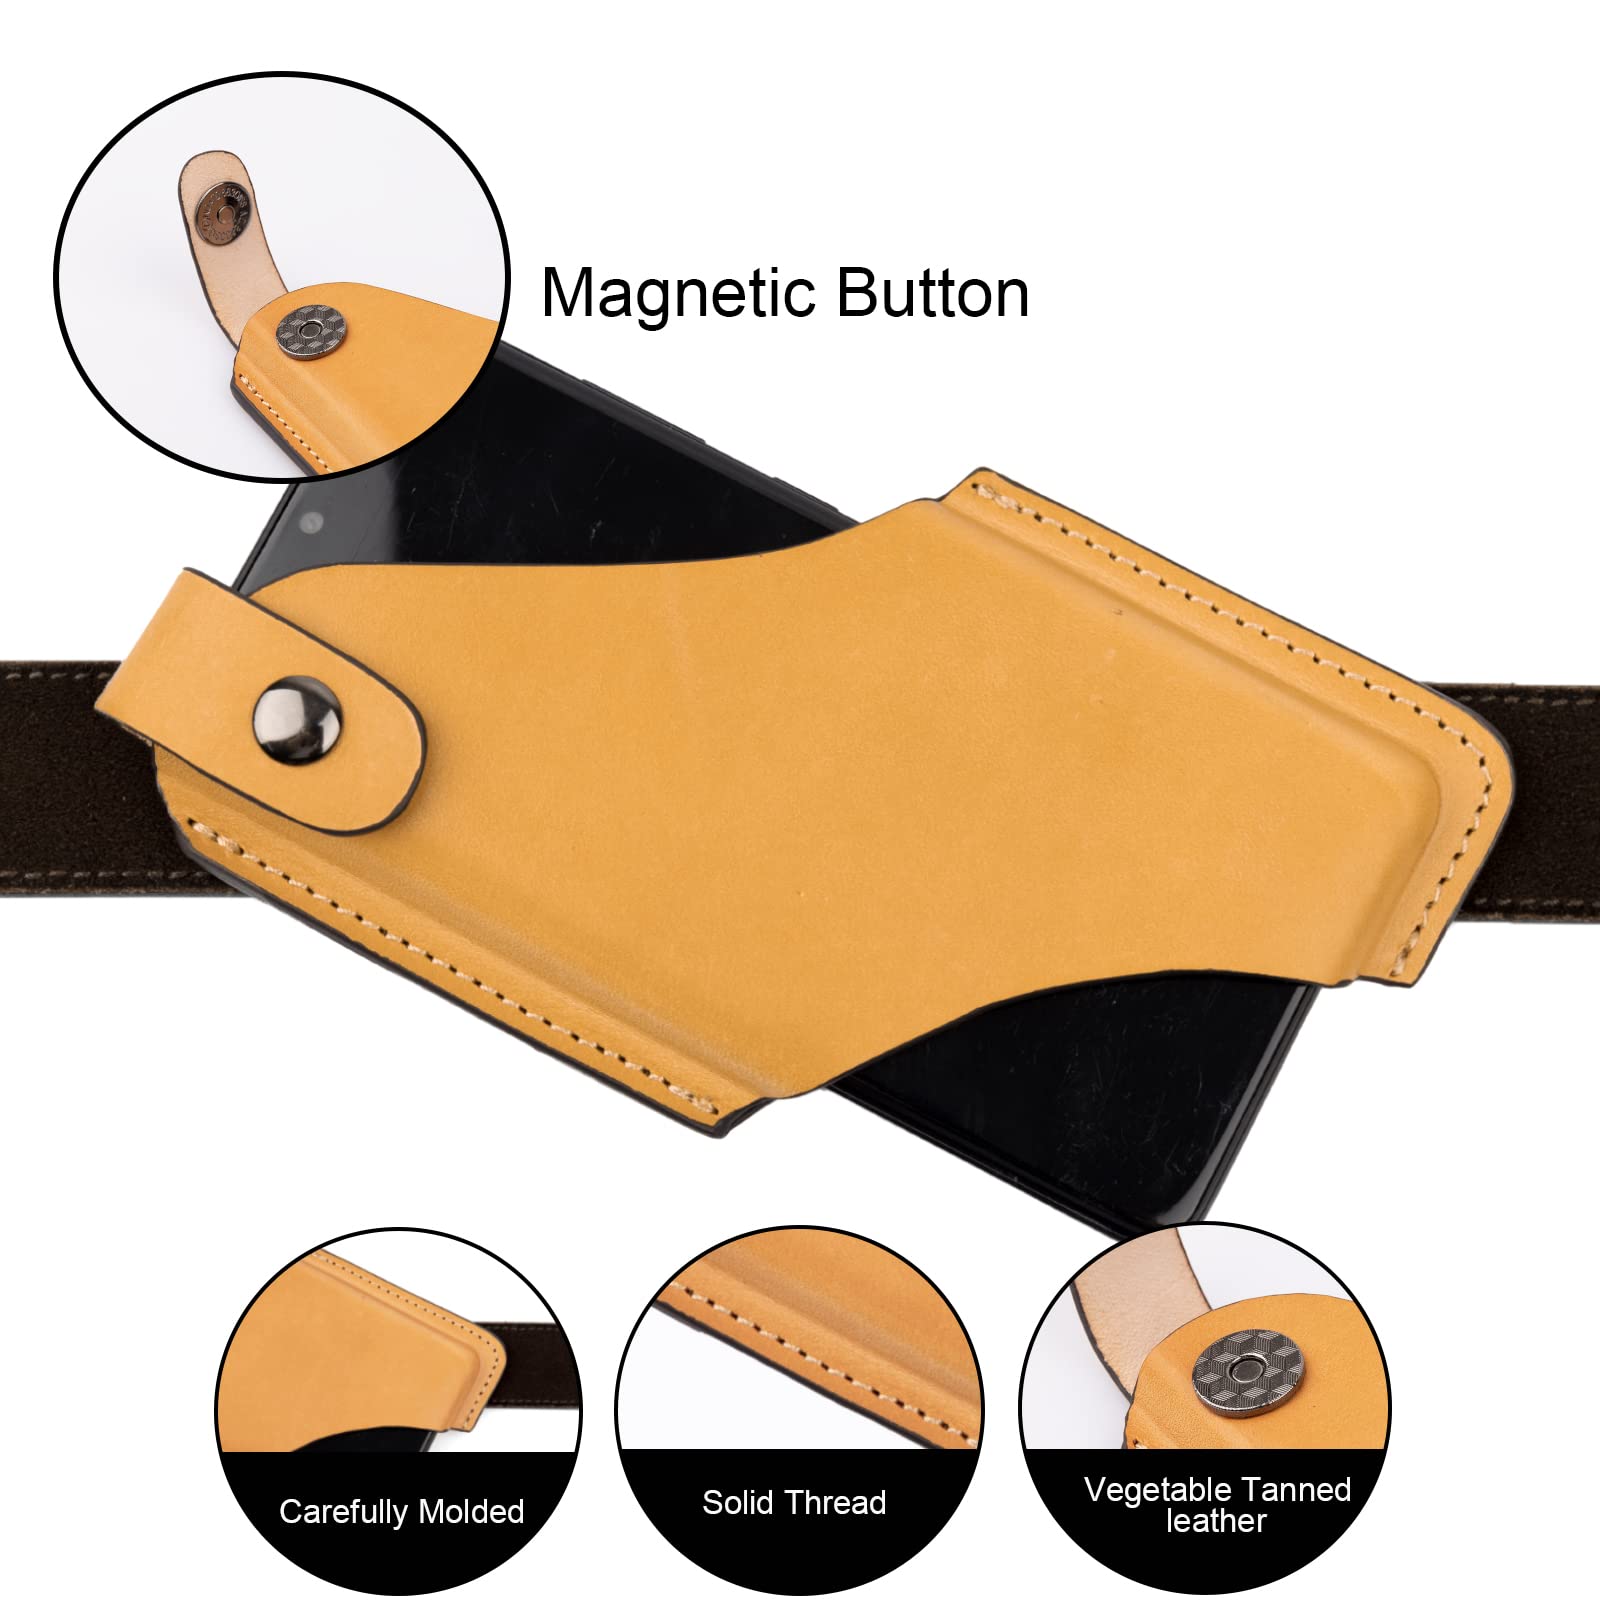 Gentlestache Leather Phone Holster, Phone Holder for Belt Loop, Cell Phone Cases, Leather Belt Pouch with Magnetic Button Brown